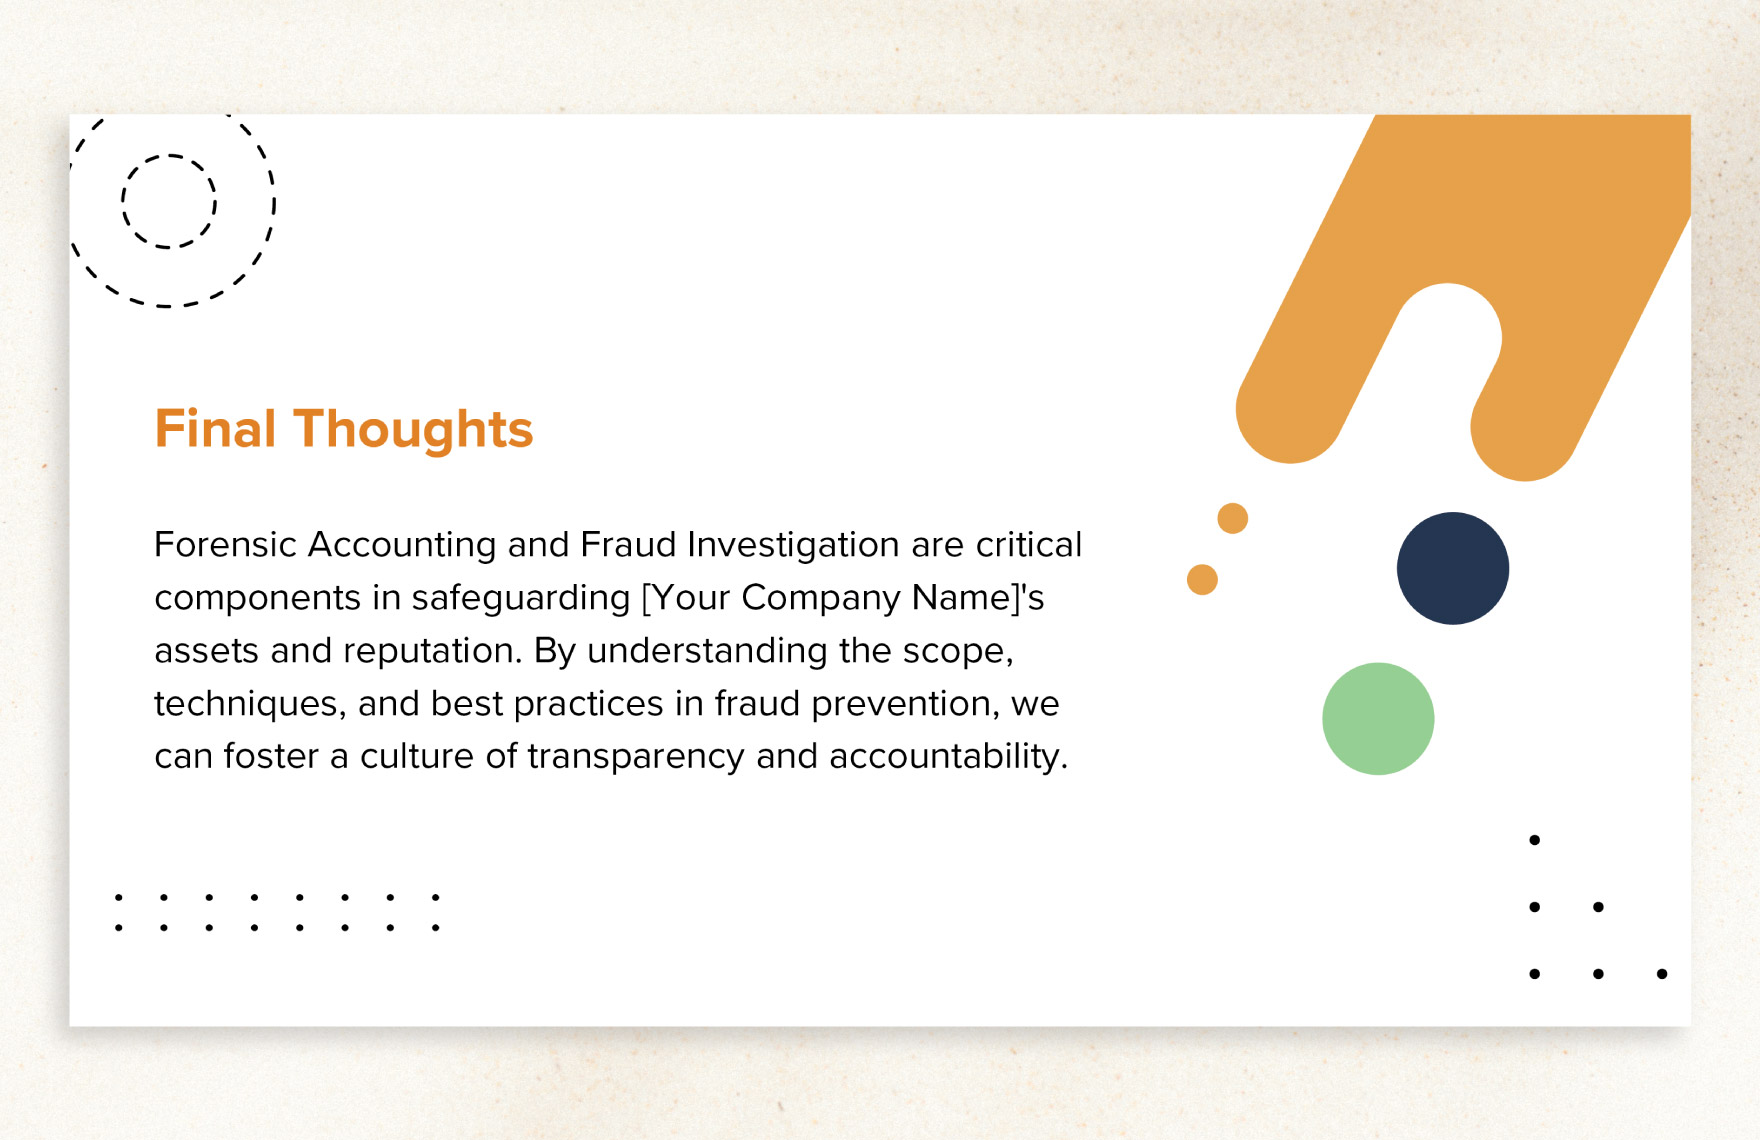 Forensic Accounting and Fraud Investigation Presentation Template